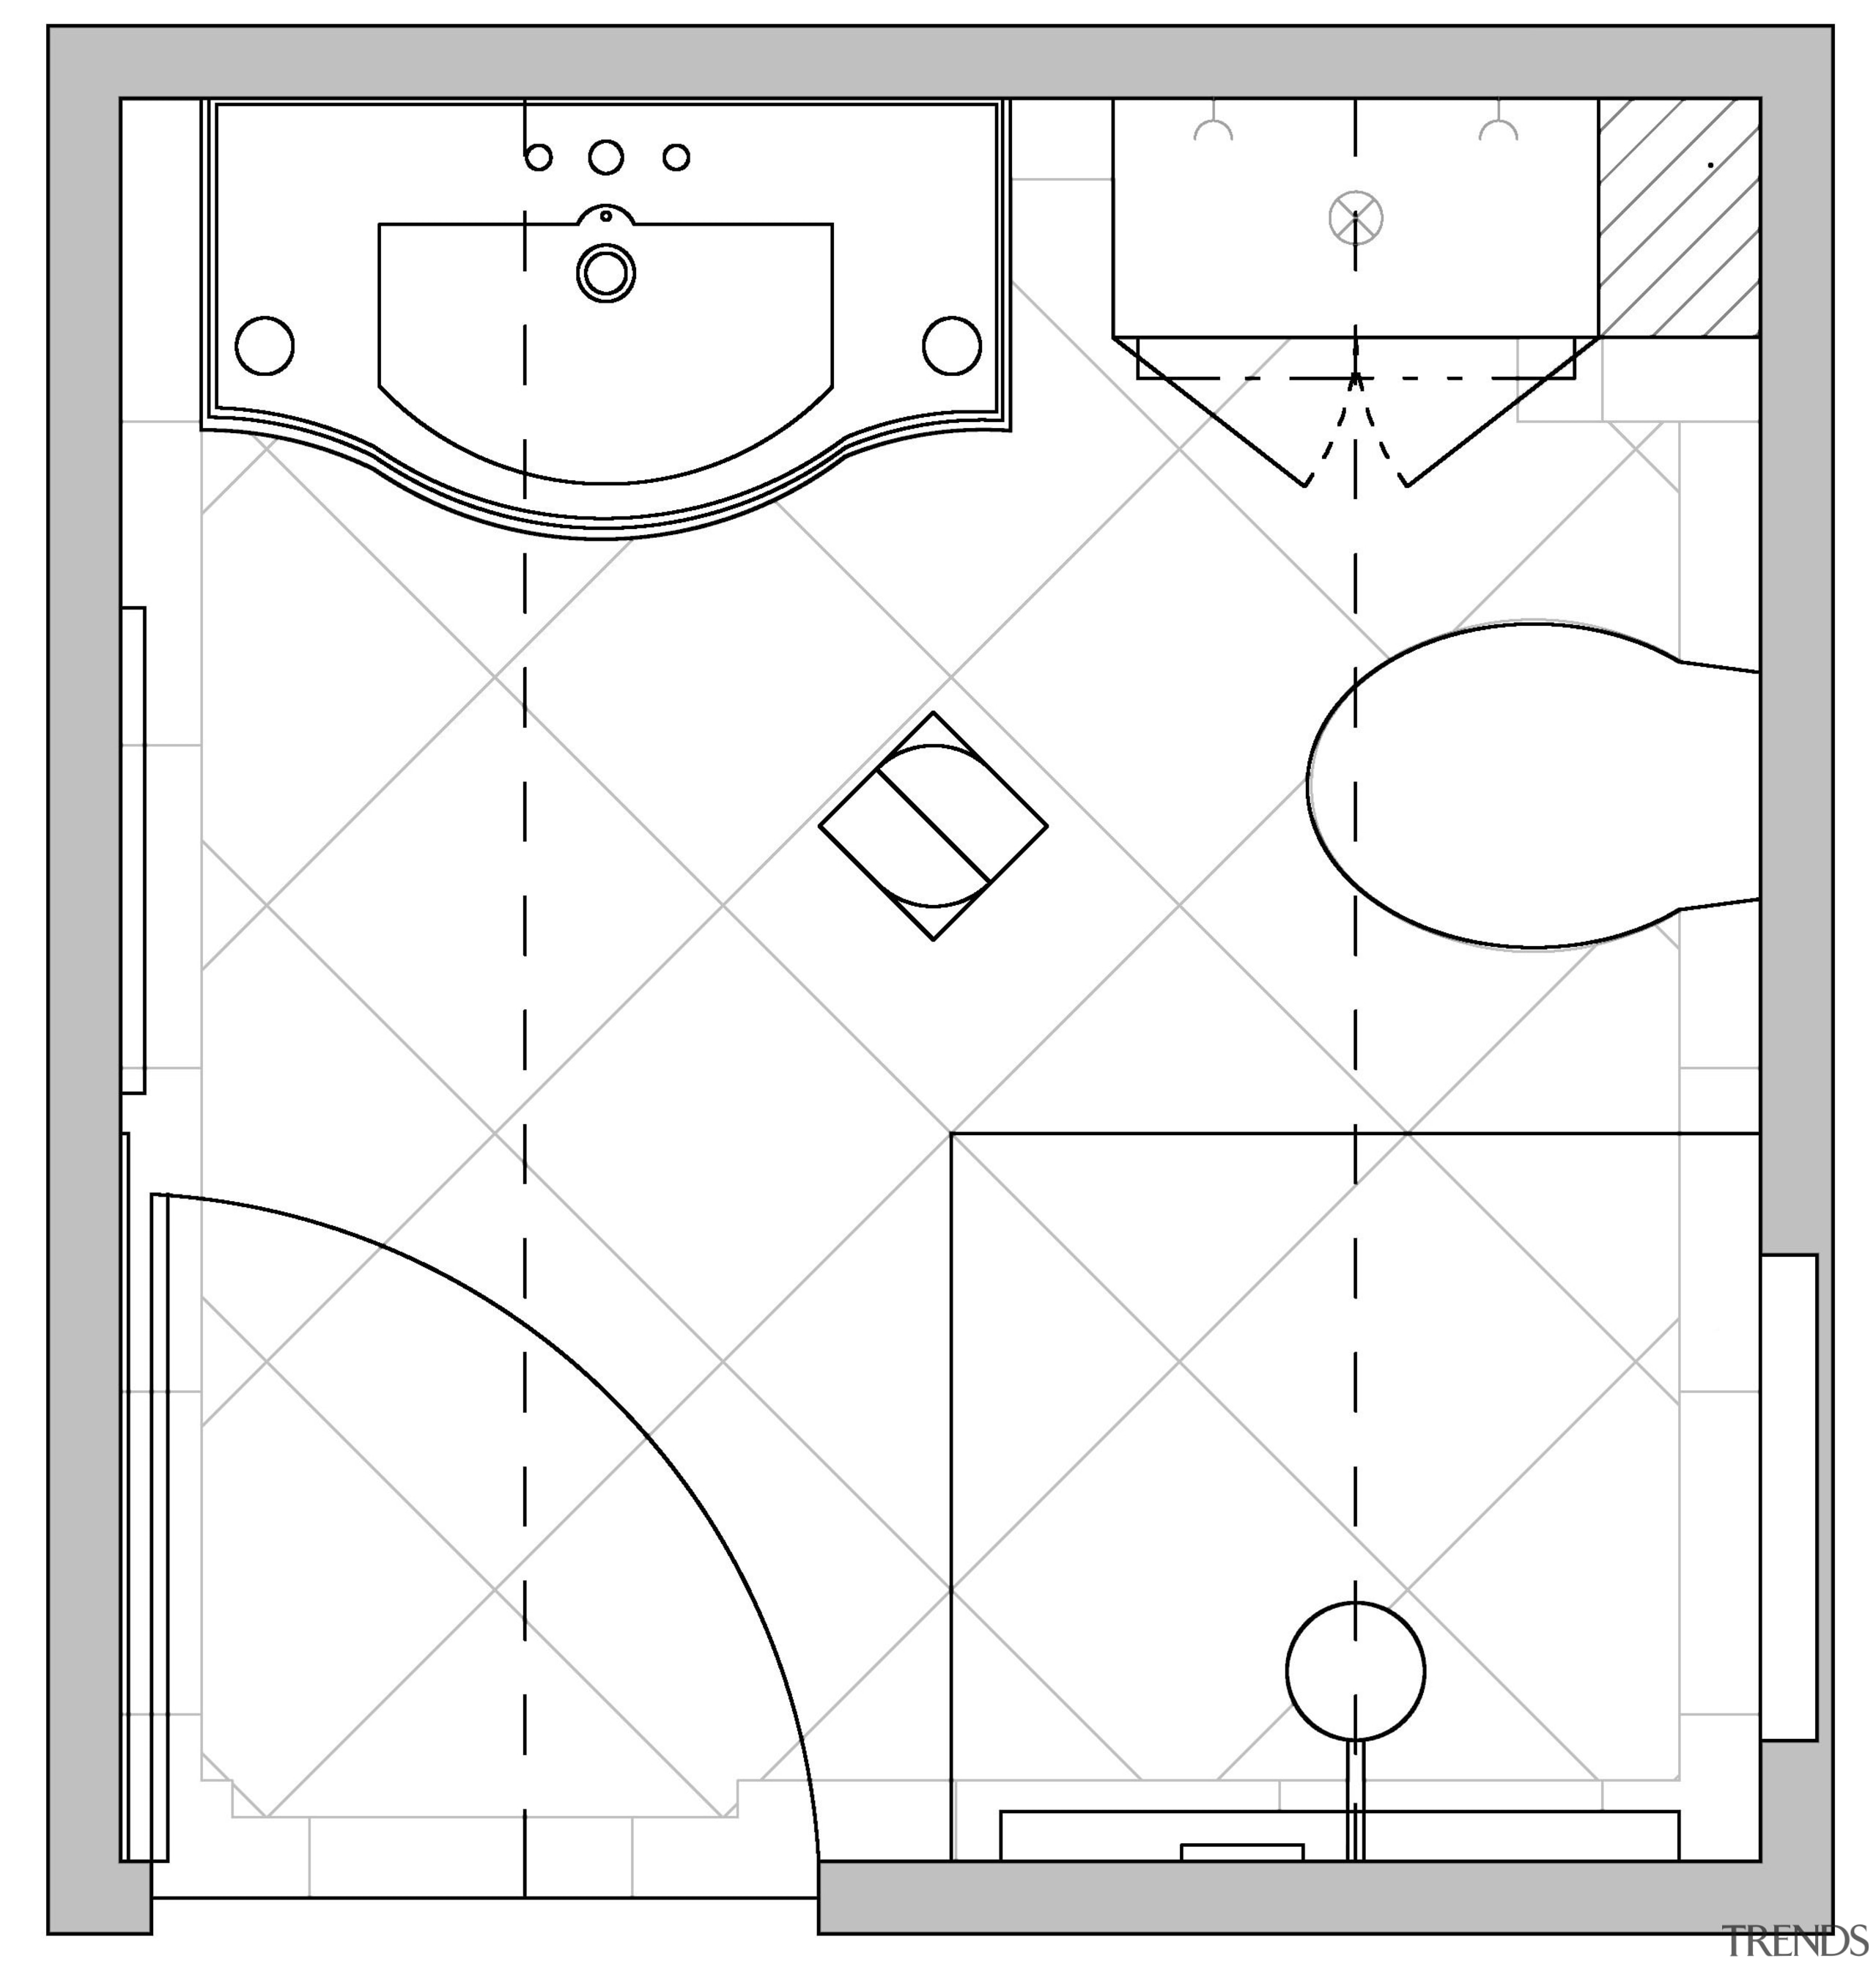 This ensuites layout optimises space at literally every angle, area, black and white, design, diagram, drawing, line, line art, pattern, product design, square, symmetry, white